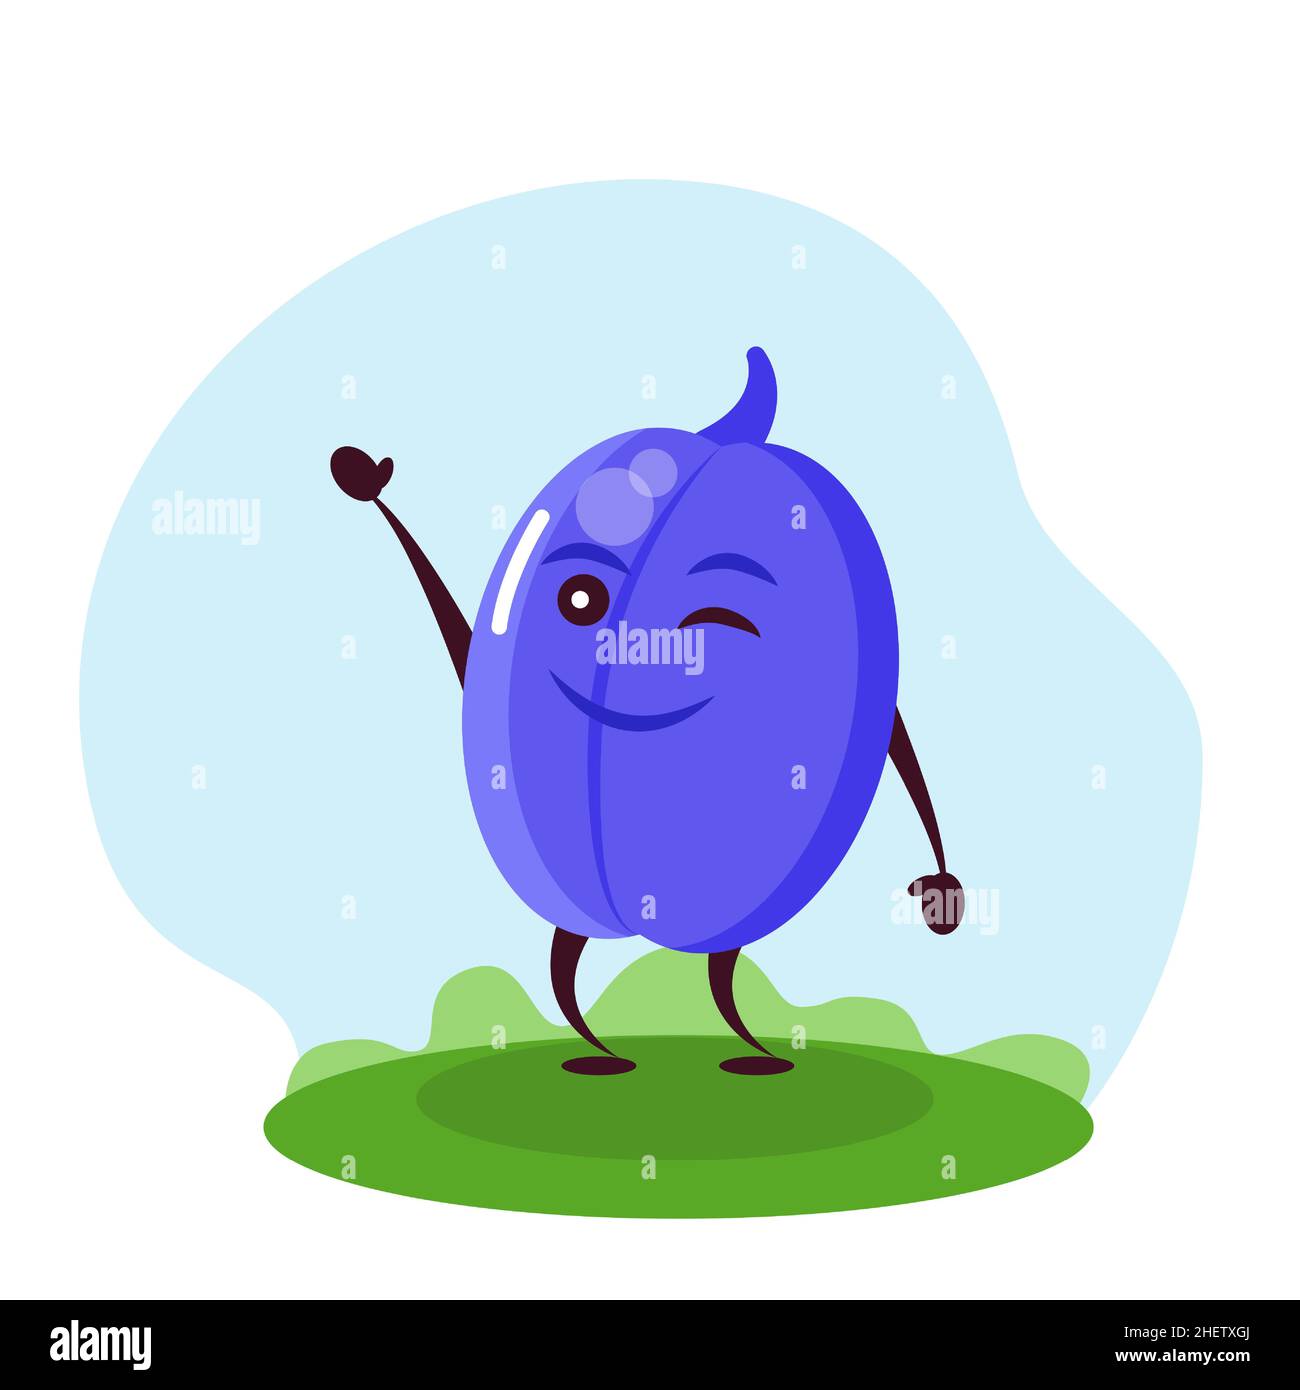 Funny plum character. Vector illustration in cartoon style for children. Stock Vector